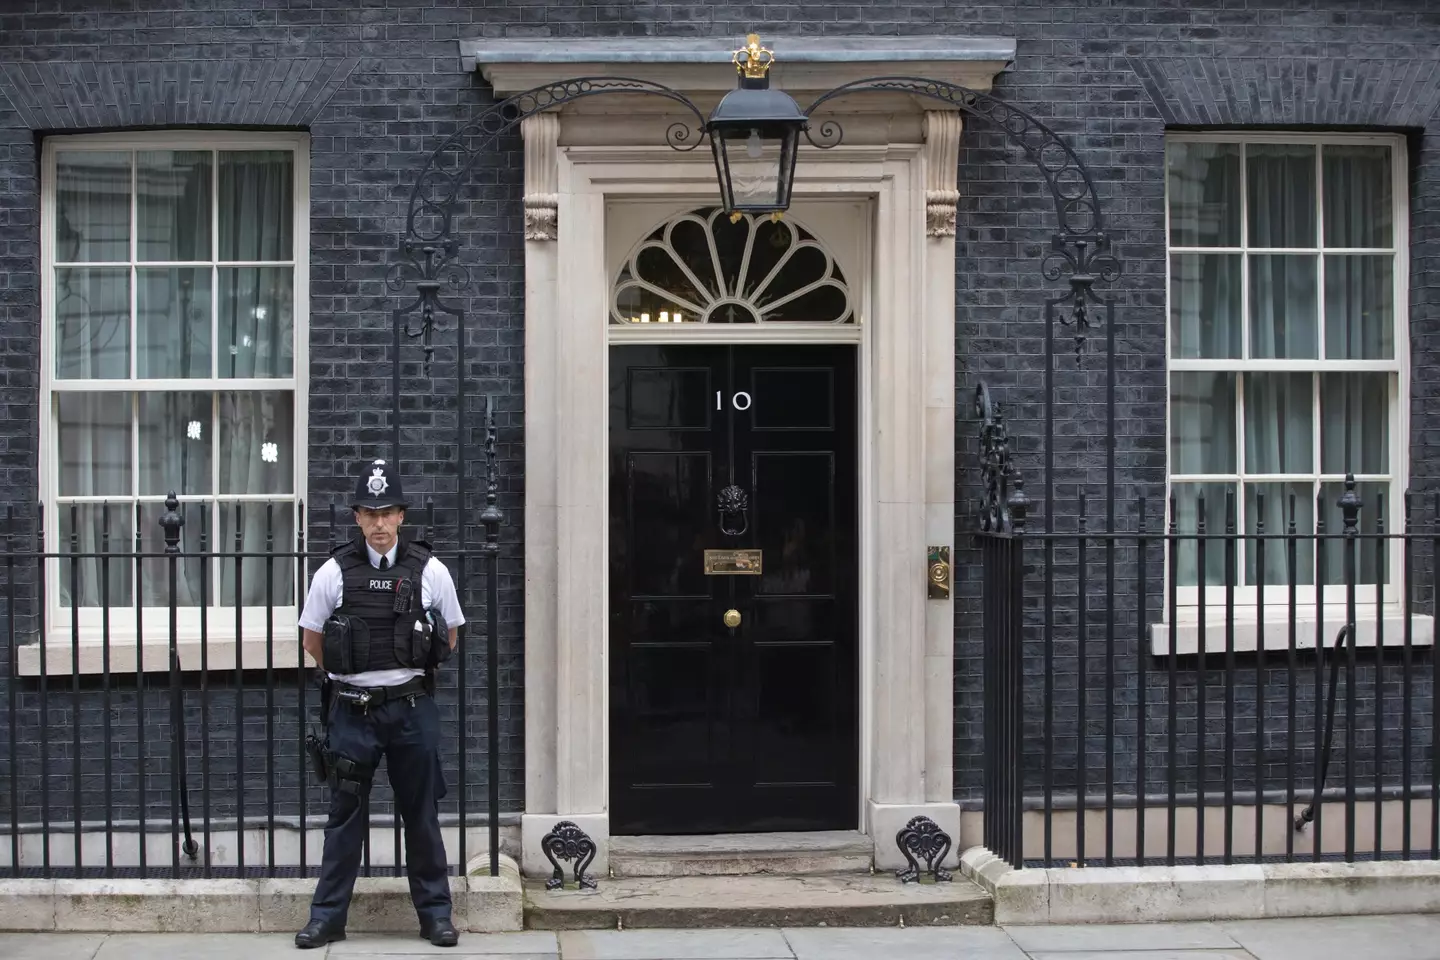 A number of parties are thought to have taken place at the Prime Minister's home (